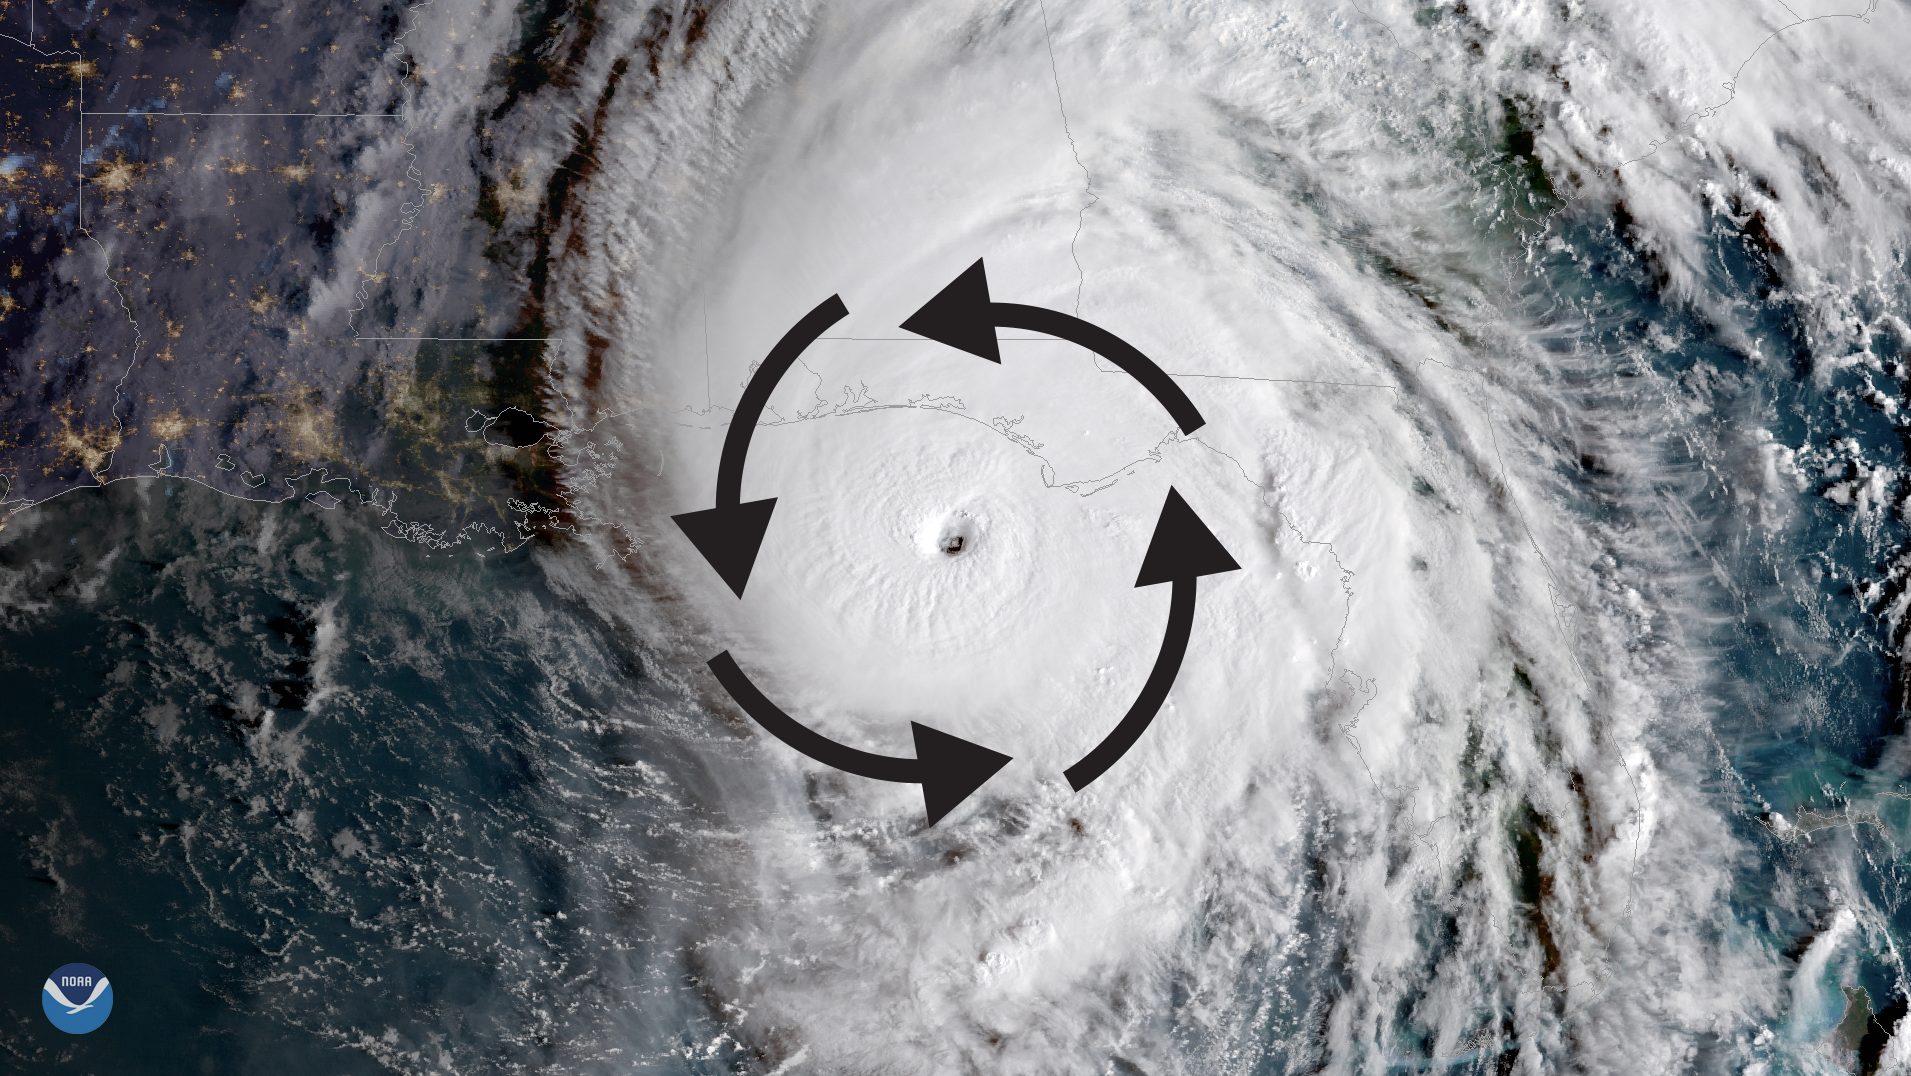 This satellite image of Hurricane Michael from October 10, 2018 has arrows superimposed on top to show the closed circulation wind pattern that is characteristic of a hurricane.